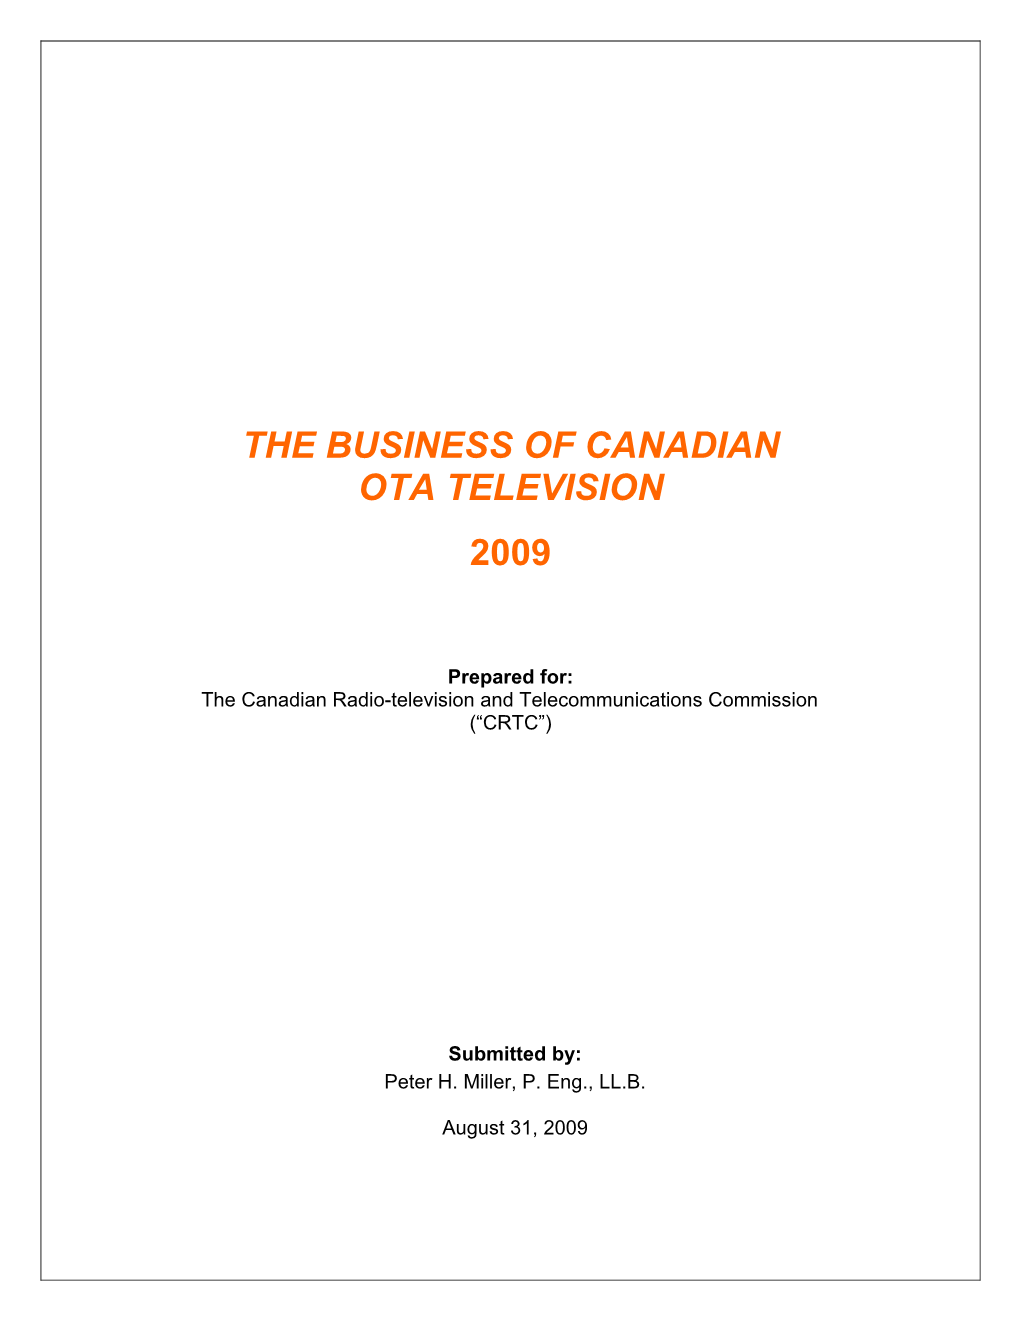 The Business of Canadian Ota Television 2009